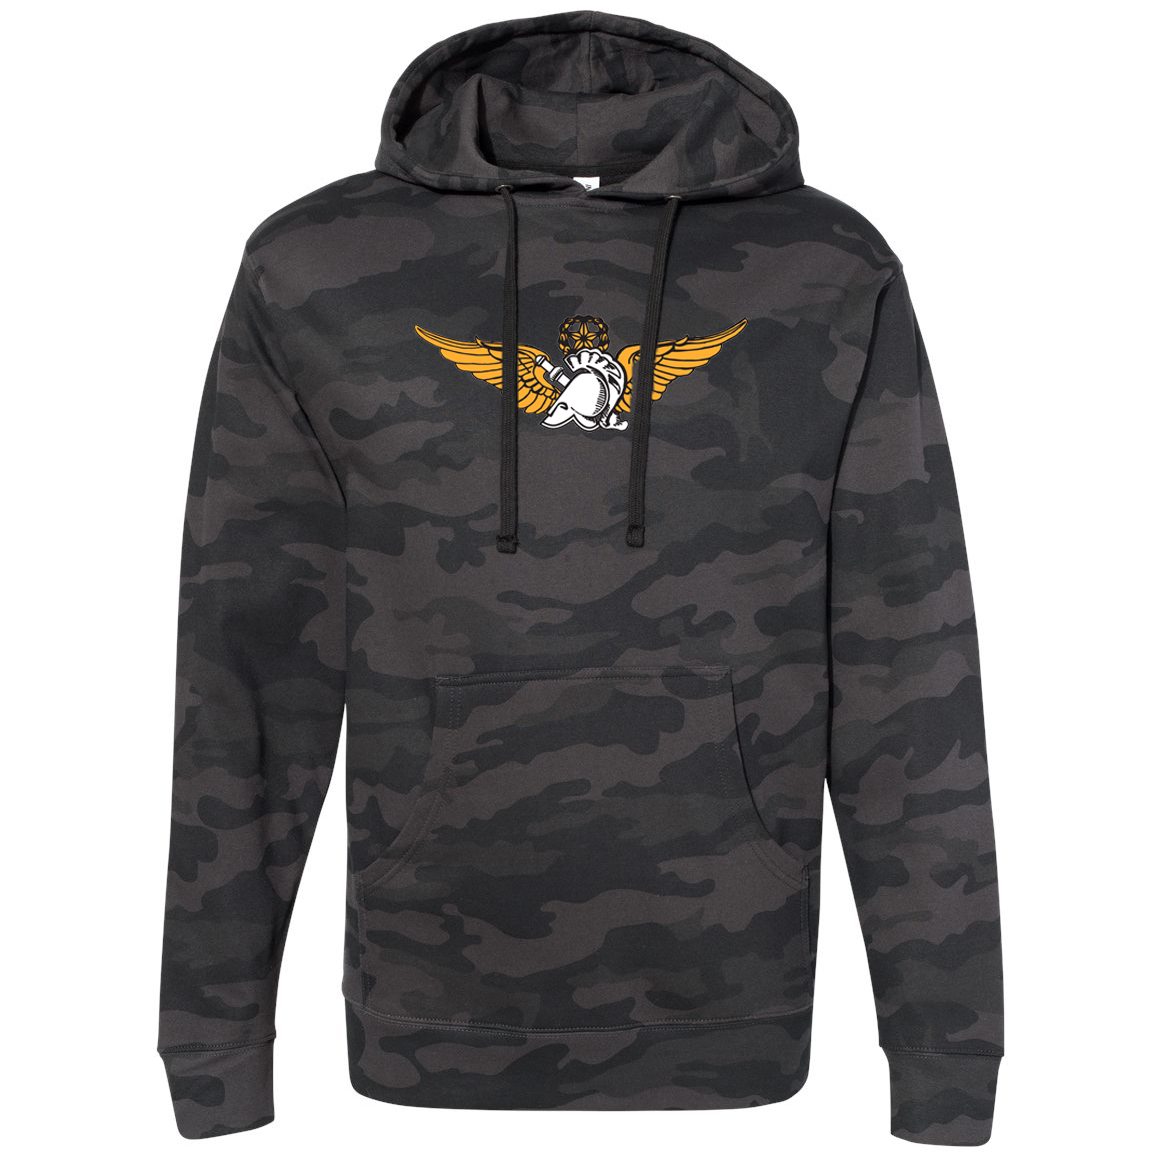 West Point Flight Team Independent Trading Co. Midweight Hoodie